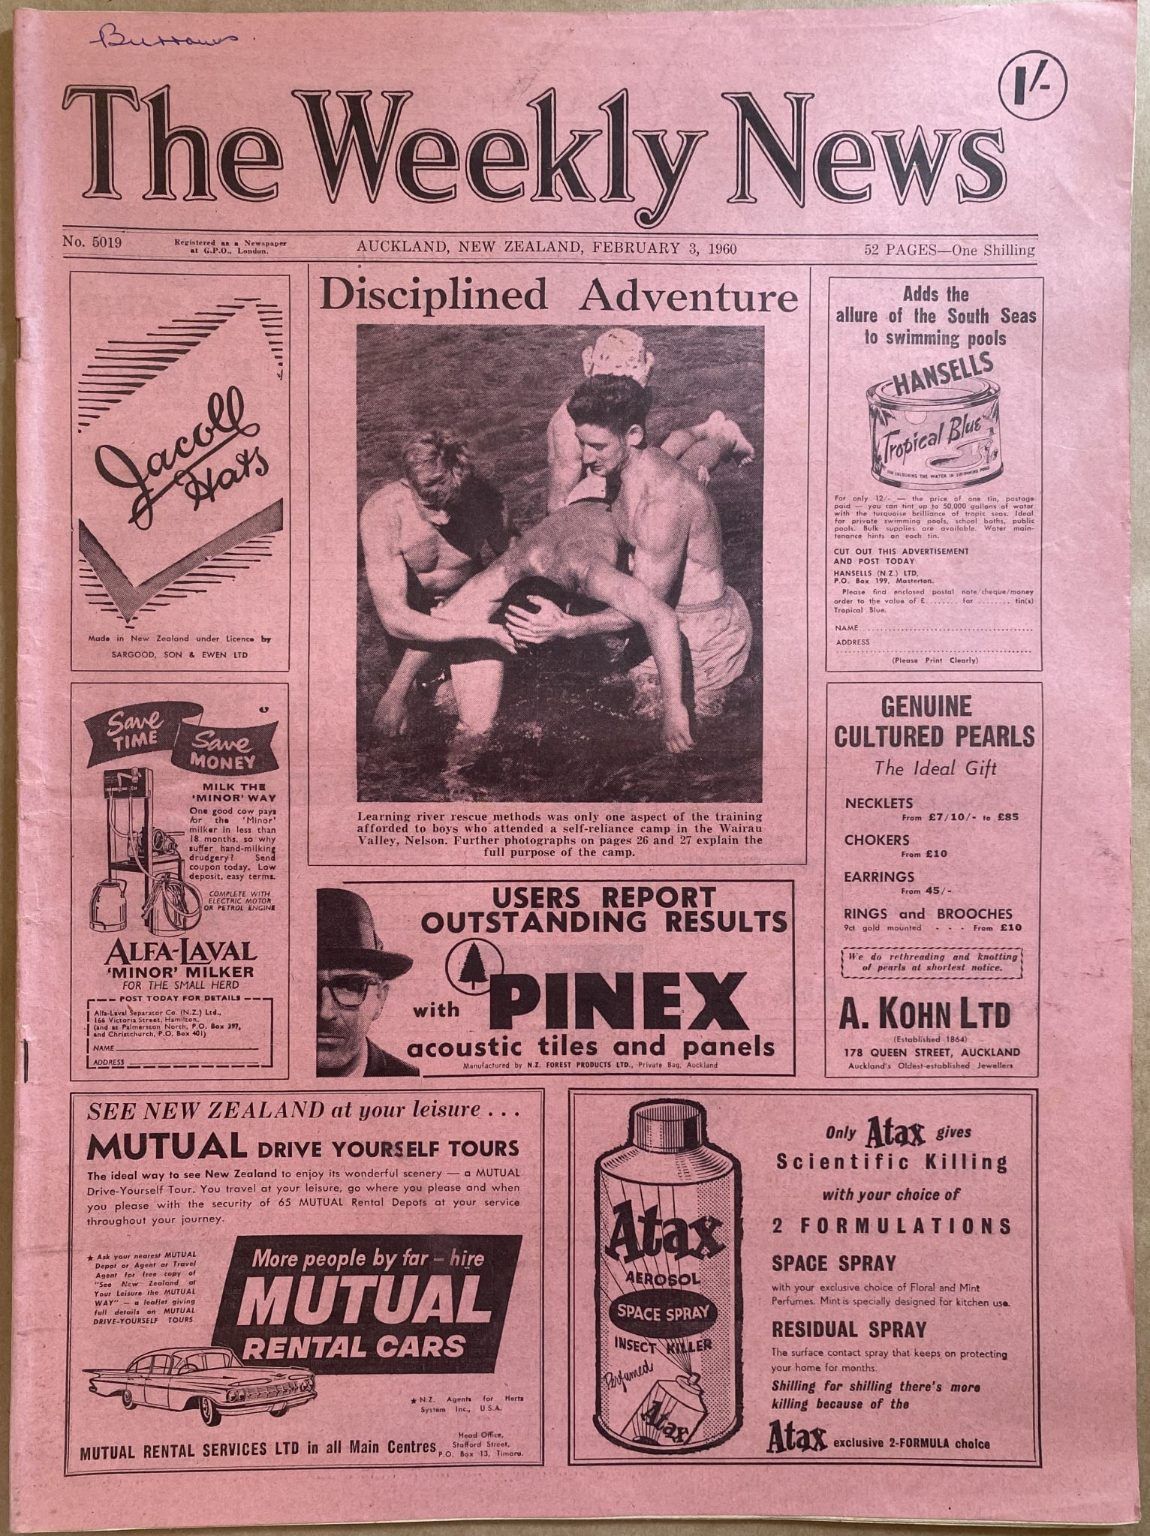 OLD NEWSPAPER: The Weekly News, No. 5019, 3 February 1960